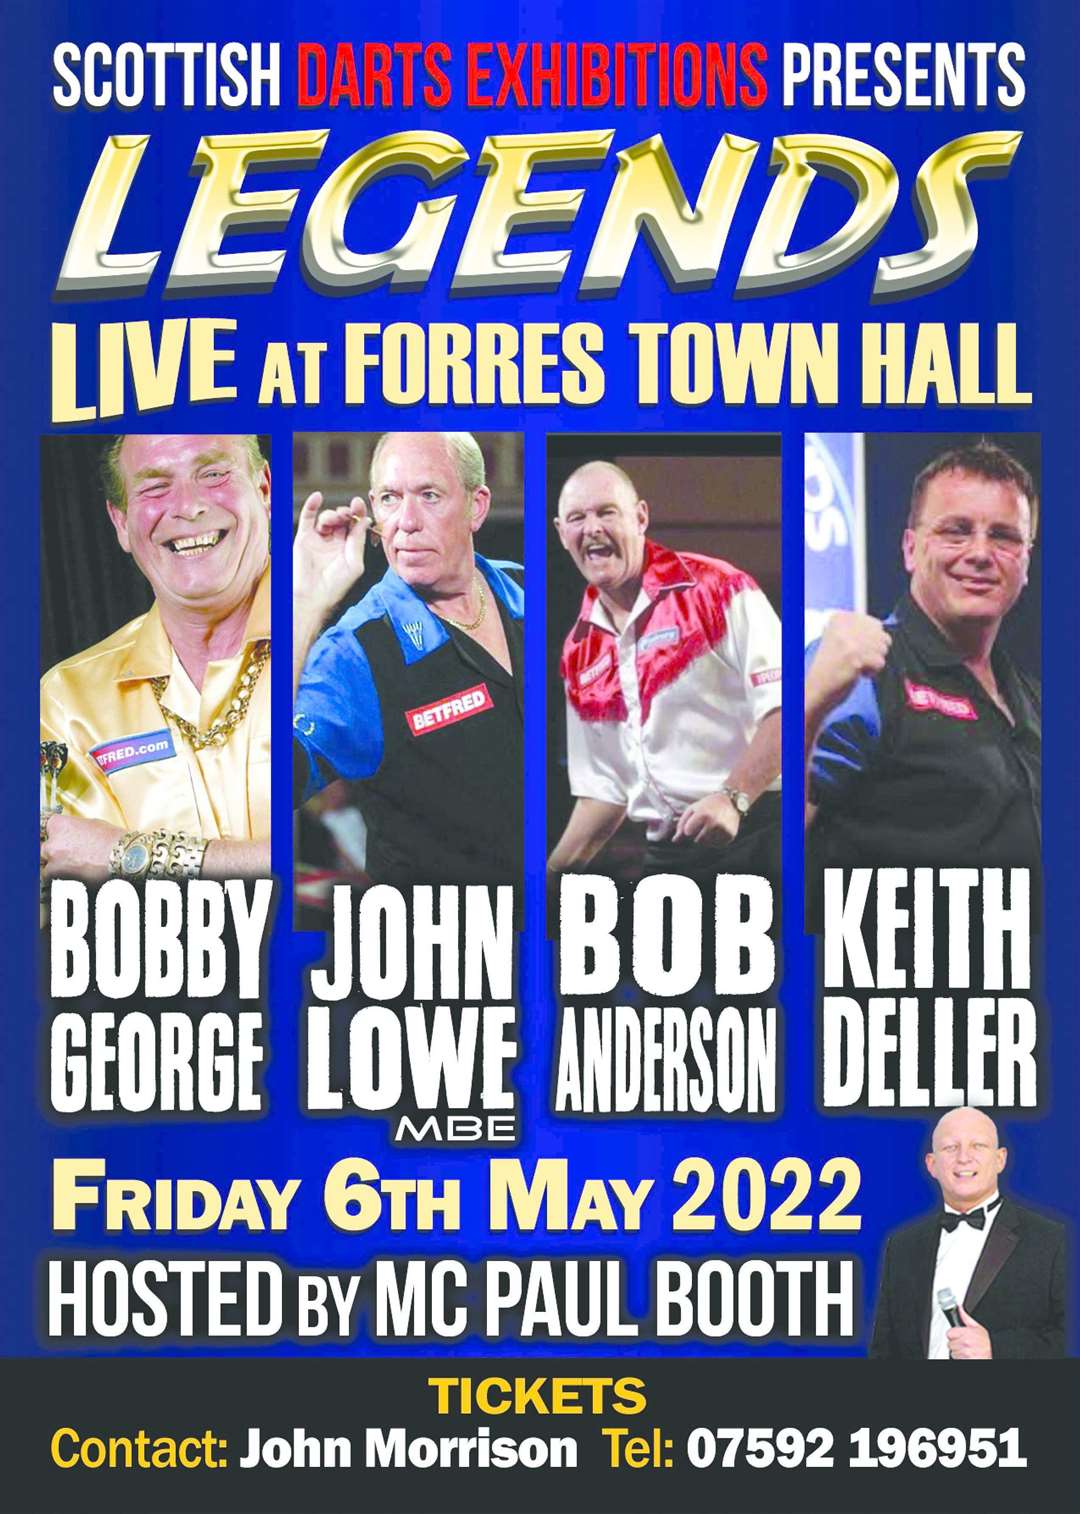 A legends' darts exhibition is set to be held at Forres Town Hall on Friday.